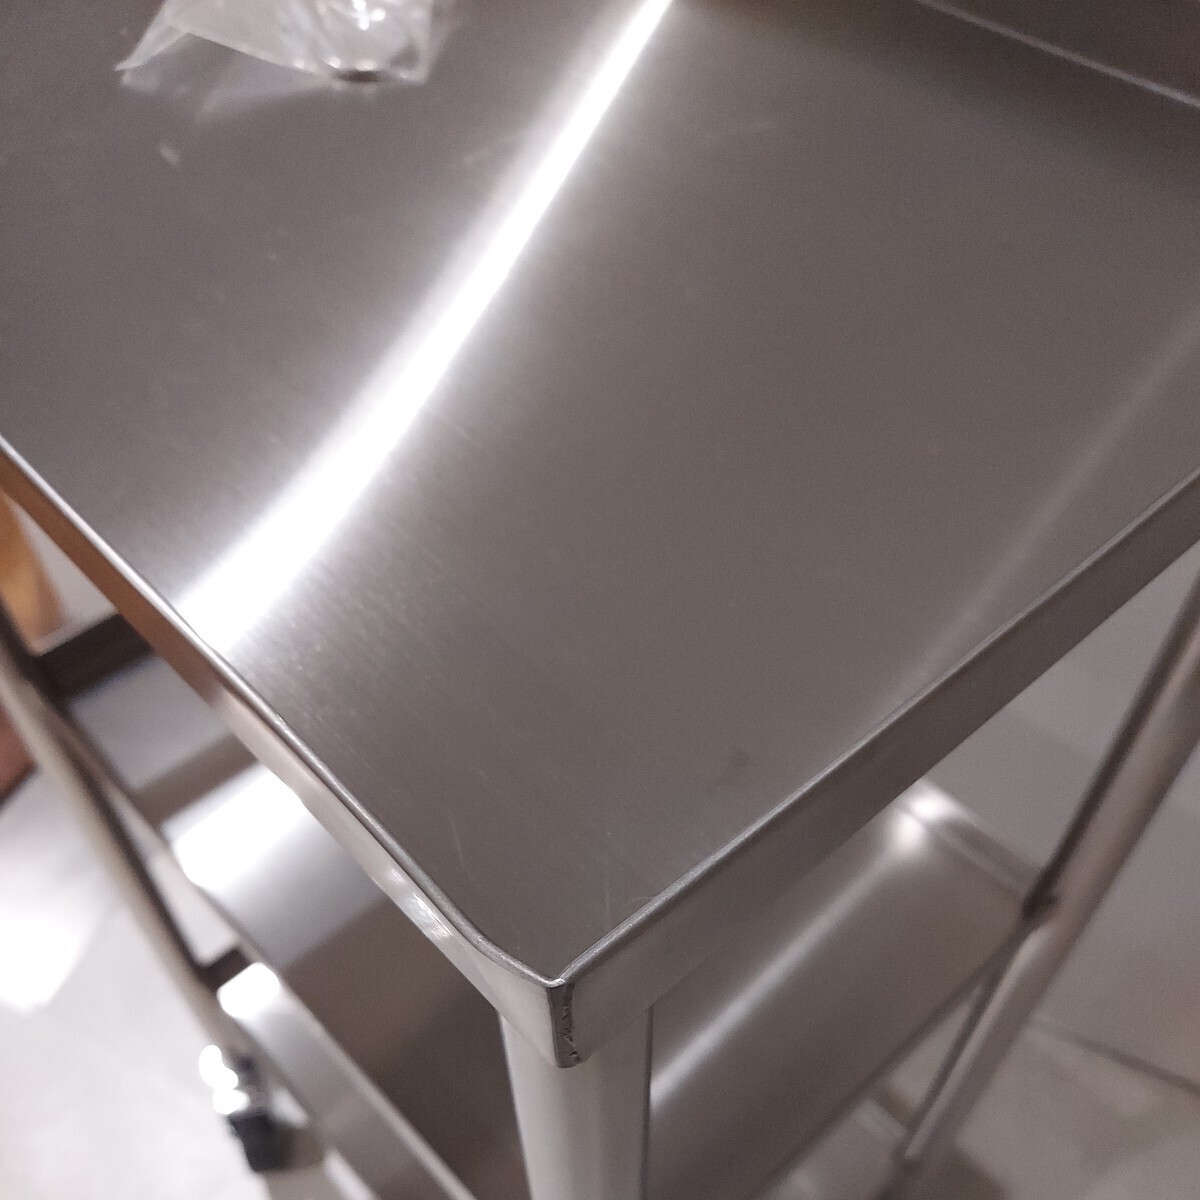  made of stainless steel Wagon almost new goods business use stainless steel 3 step kitchen beauty . interior distribution serving tray working bench 